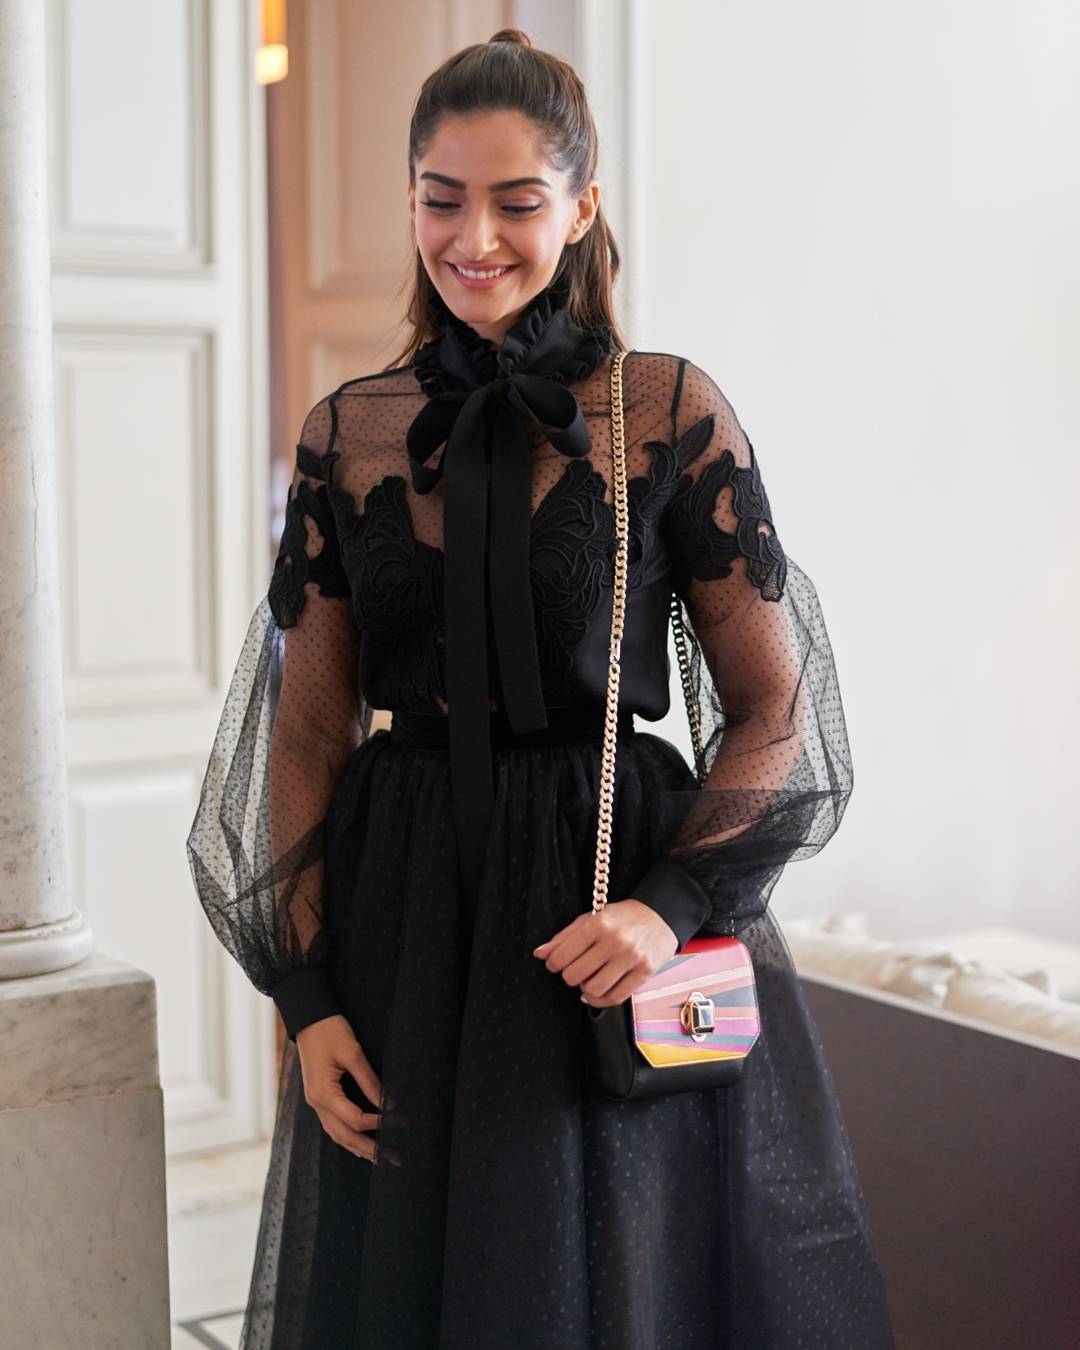 Sonam Kapoor Looked Like a Black Magic in Tulle Dress From Elie Saab's Collection